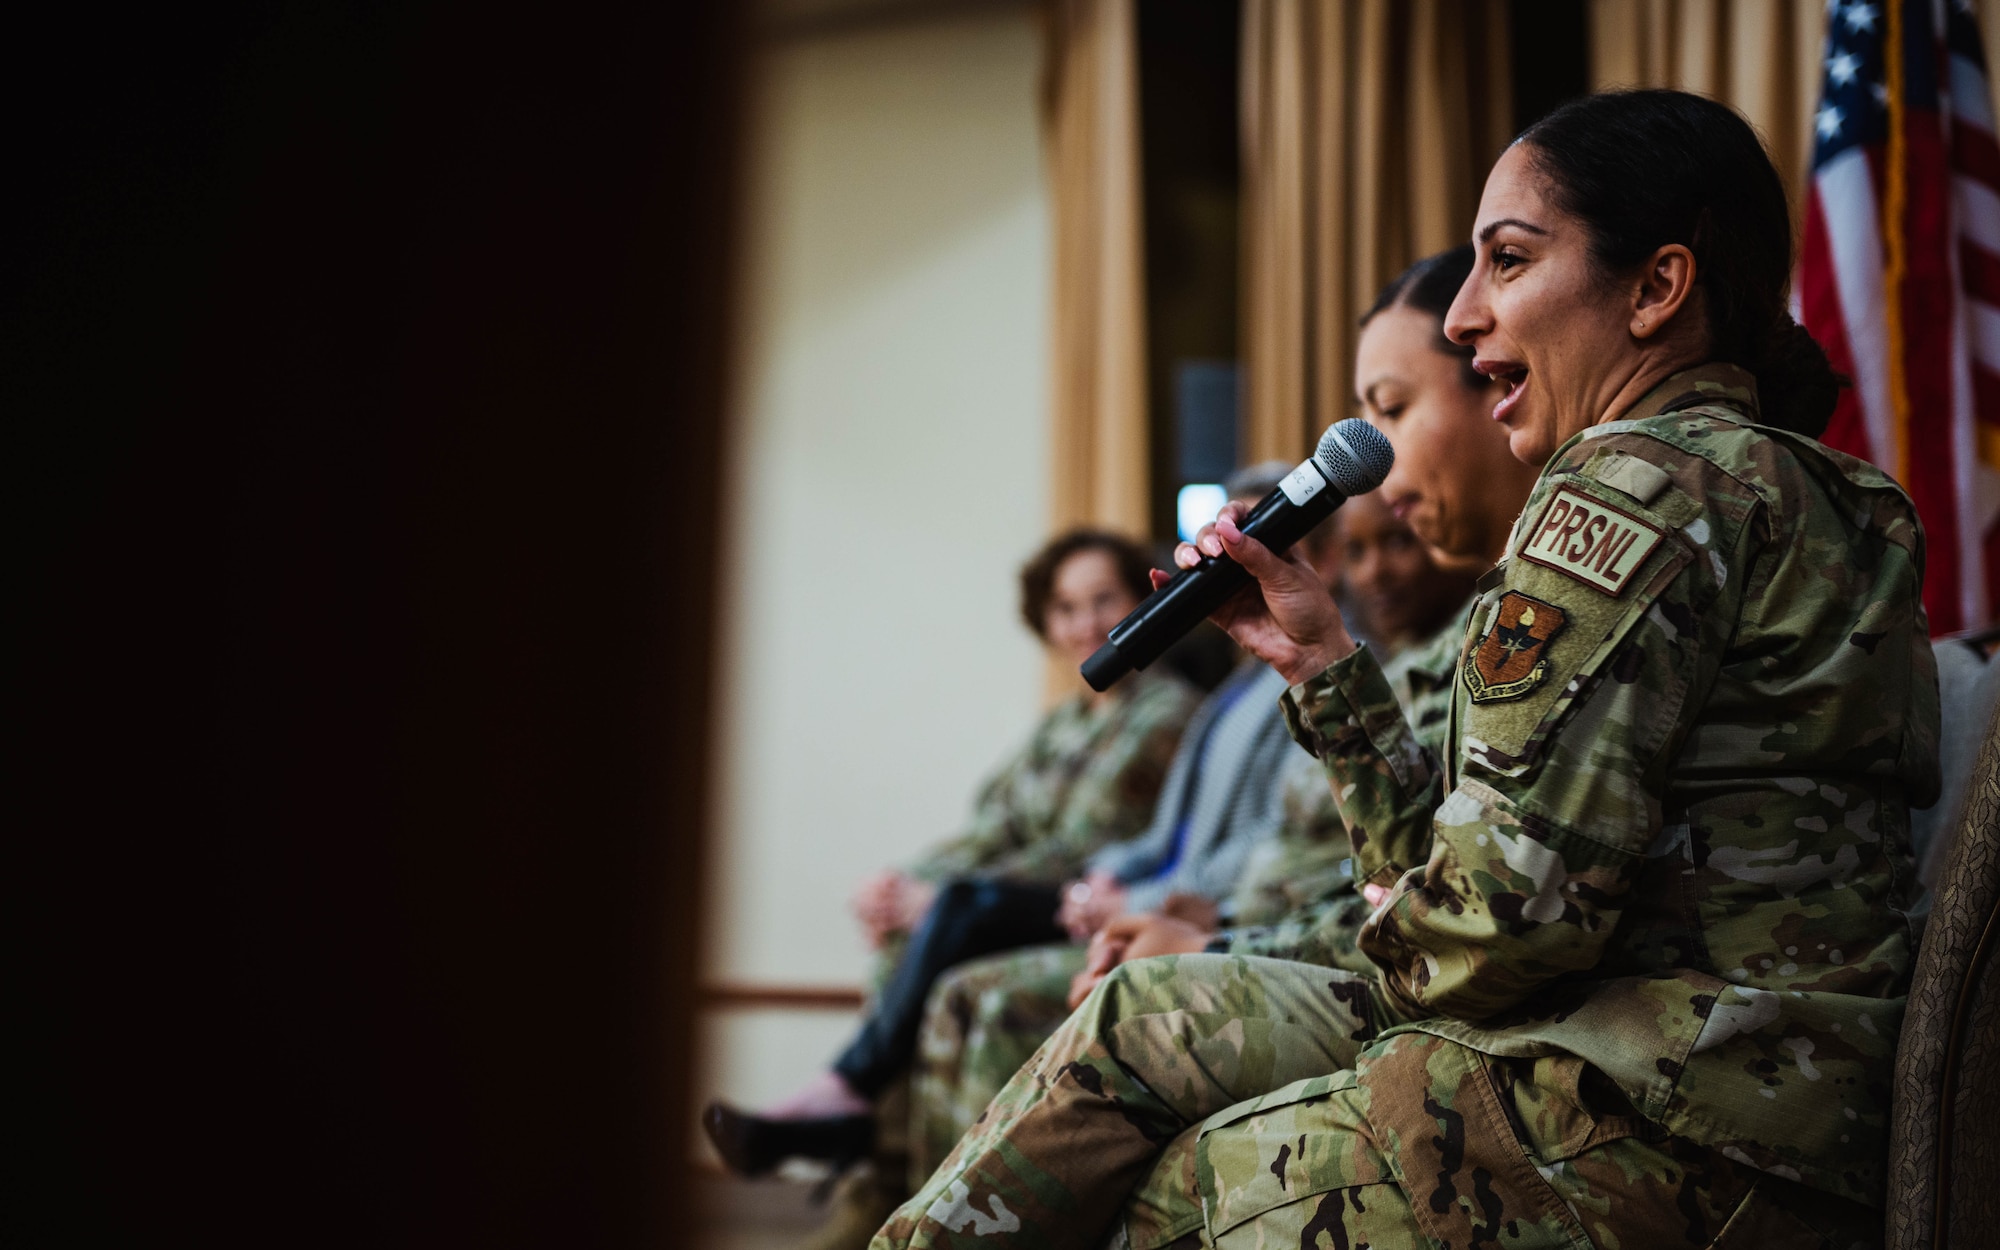 U.S. Air Force Airman 1st Class Ajin Howard, 56th Force Support Squadron career development technician, speaks at a Women’s History Month exposition.